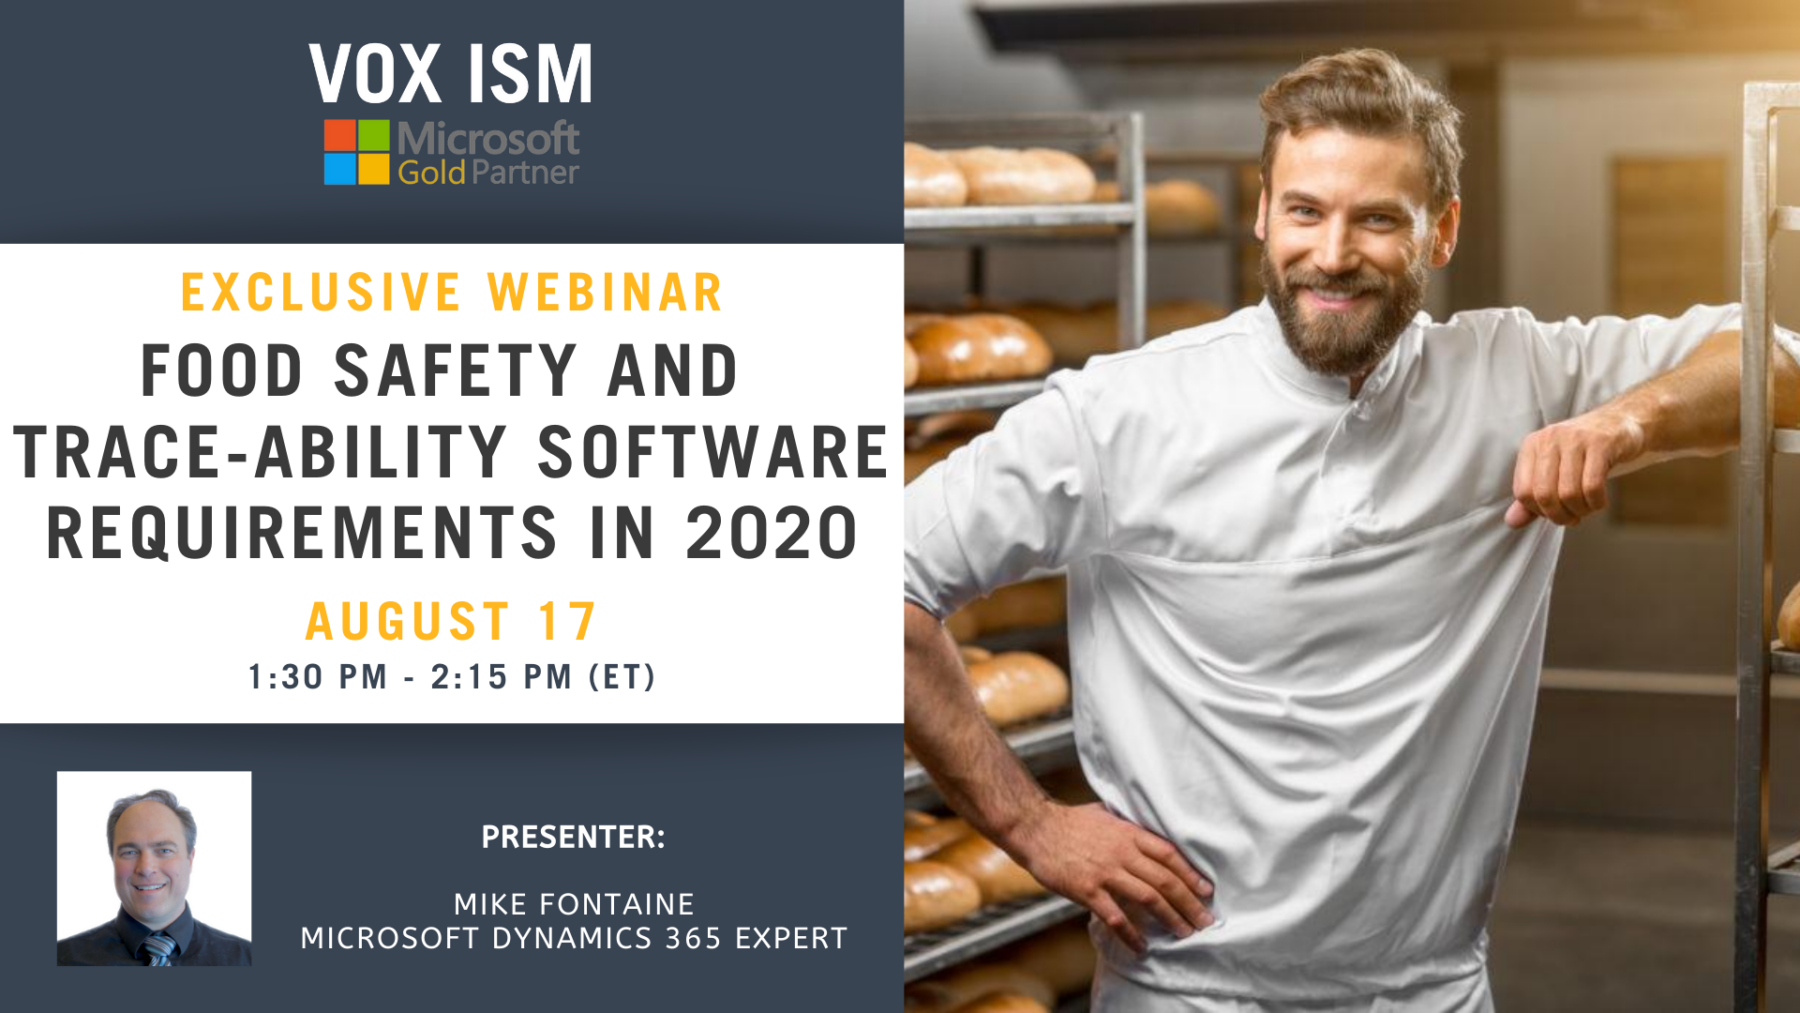 Food Safety and Trace-ability Software Requirements in 2020 - August 17 - Webinar